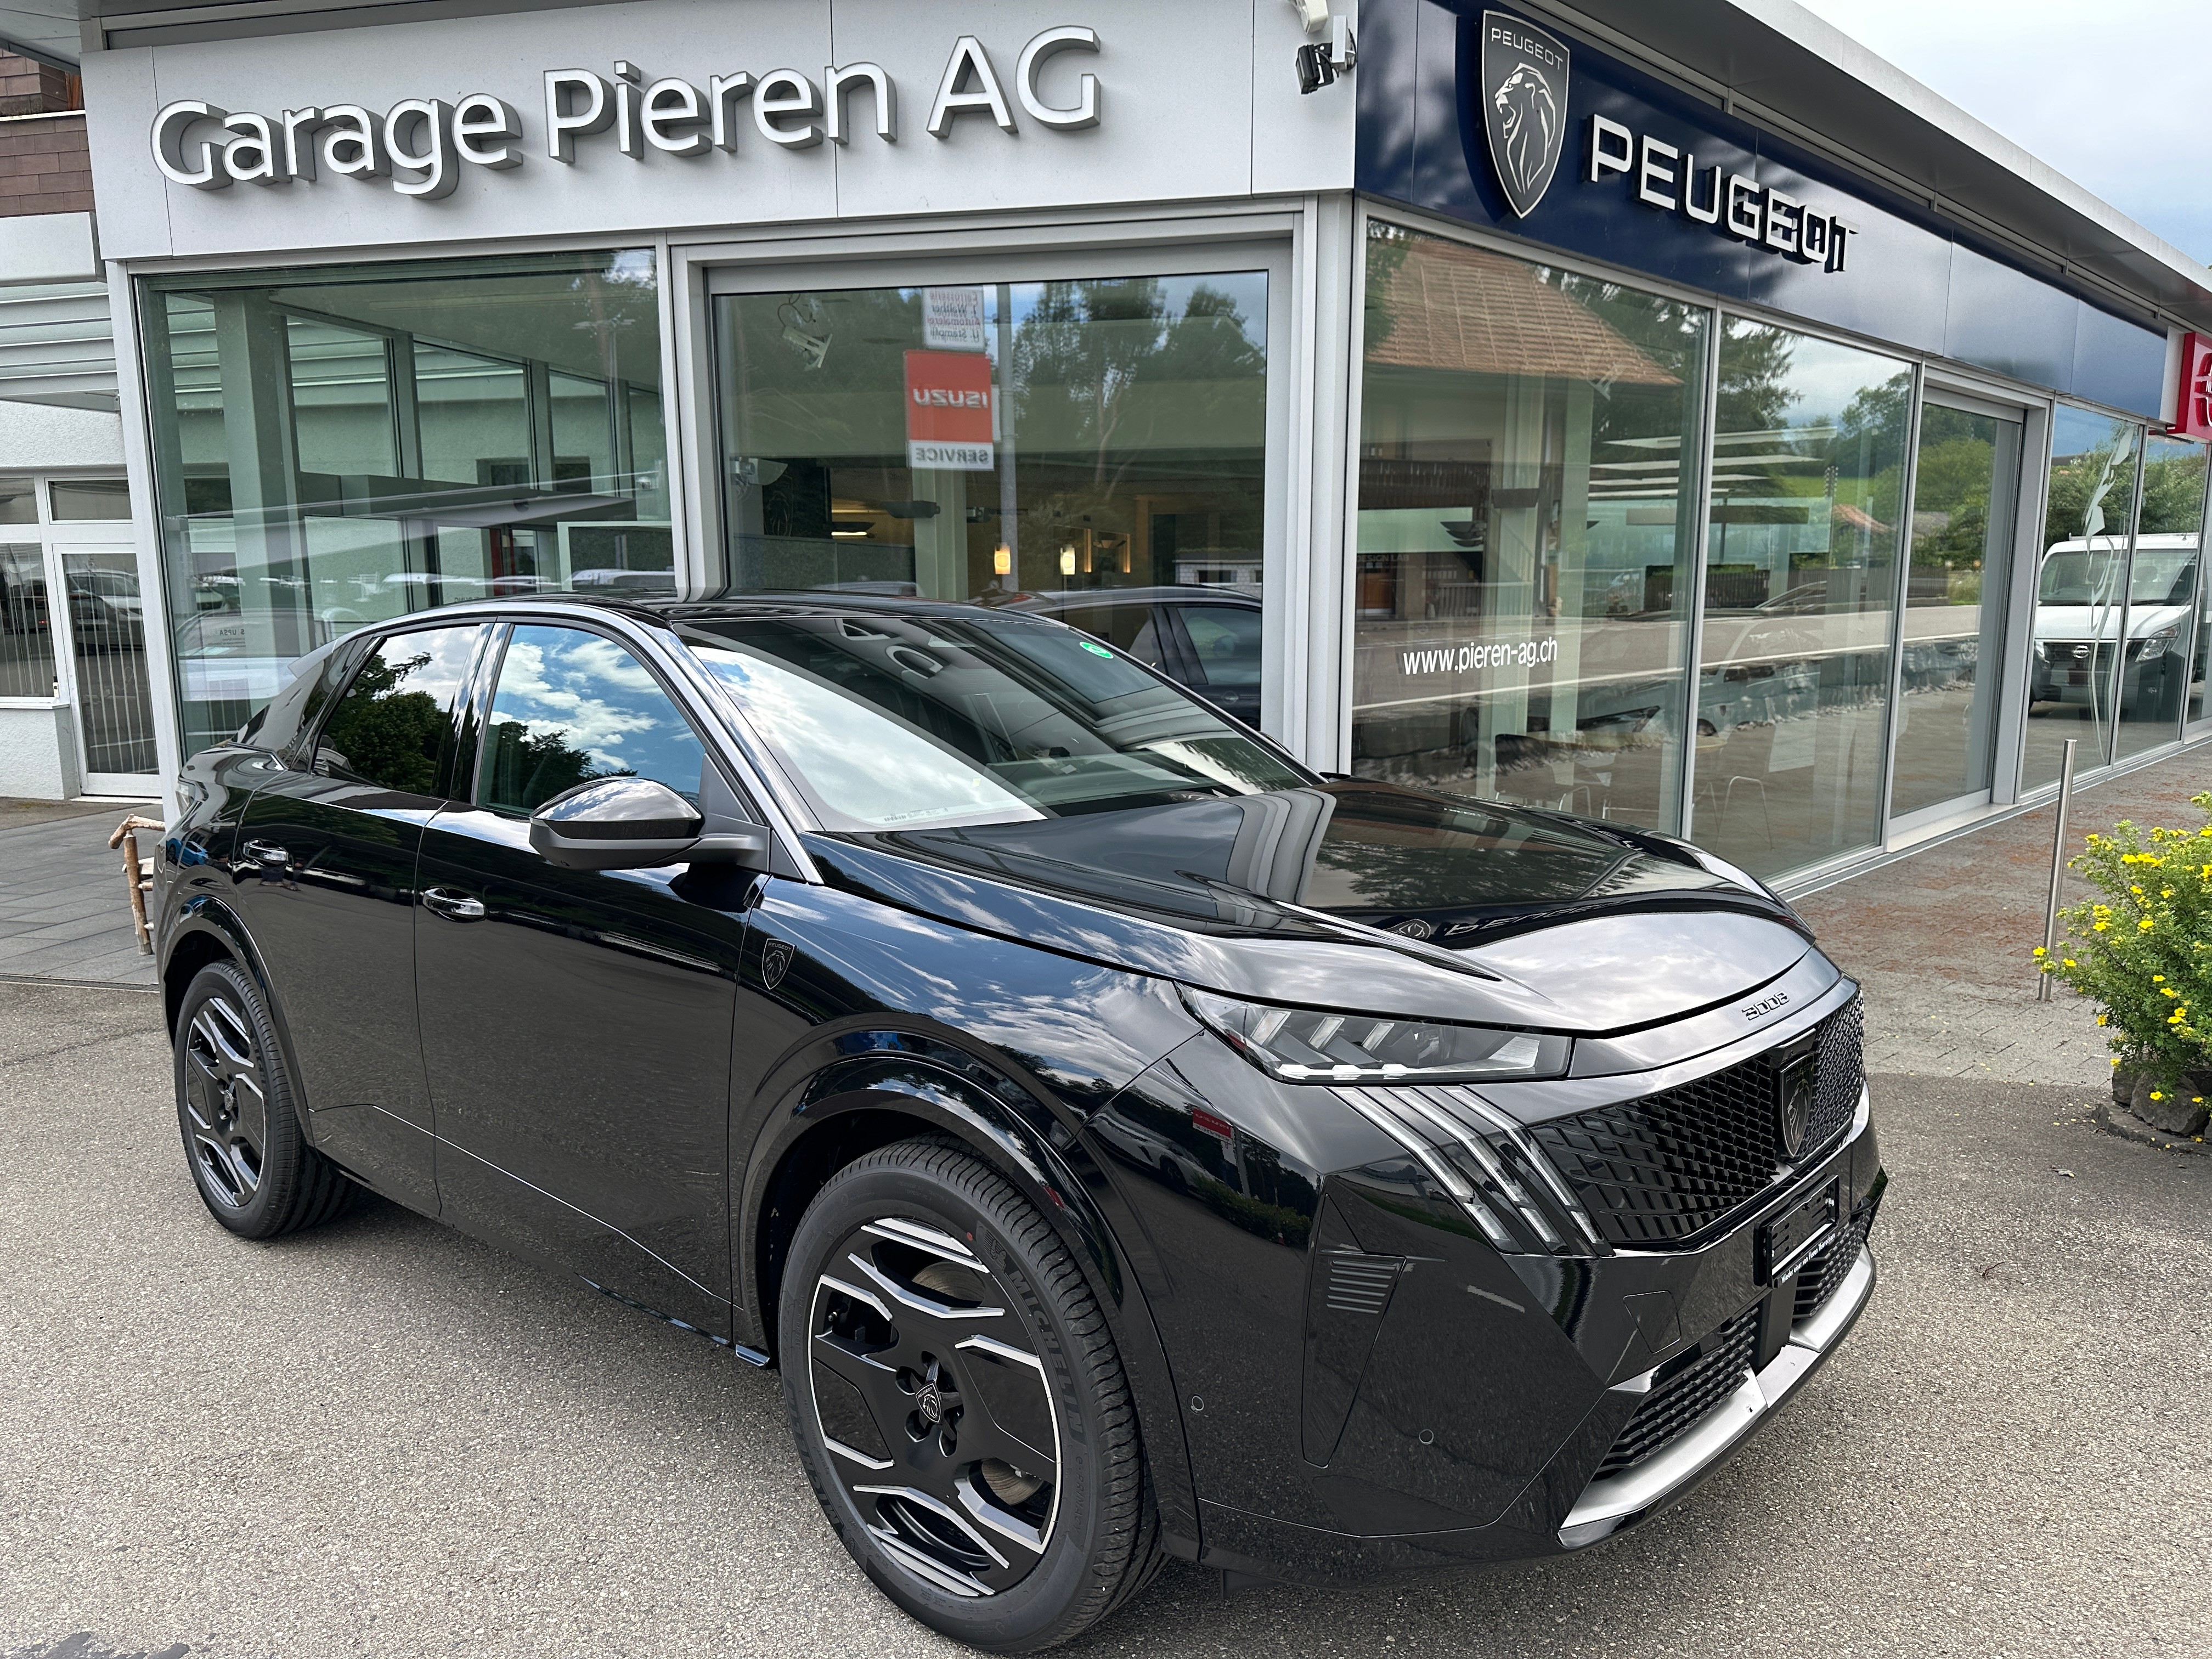 PEUGEOT 3008 73kWh GT